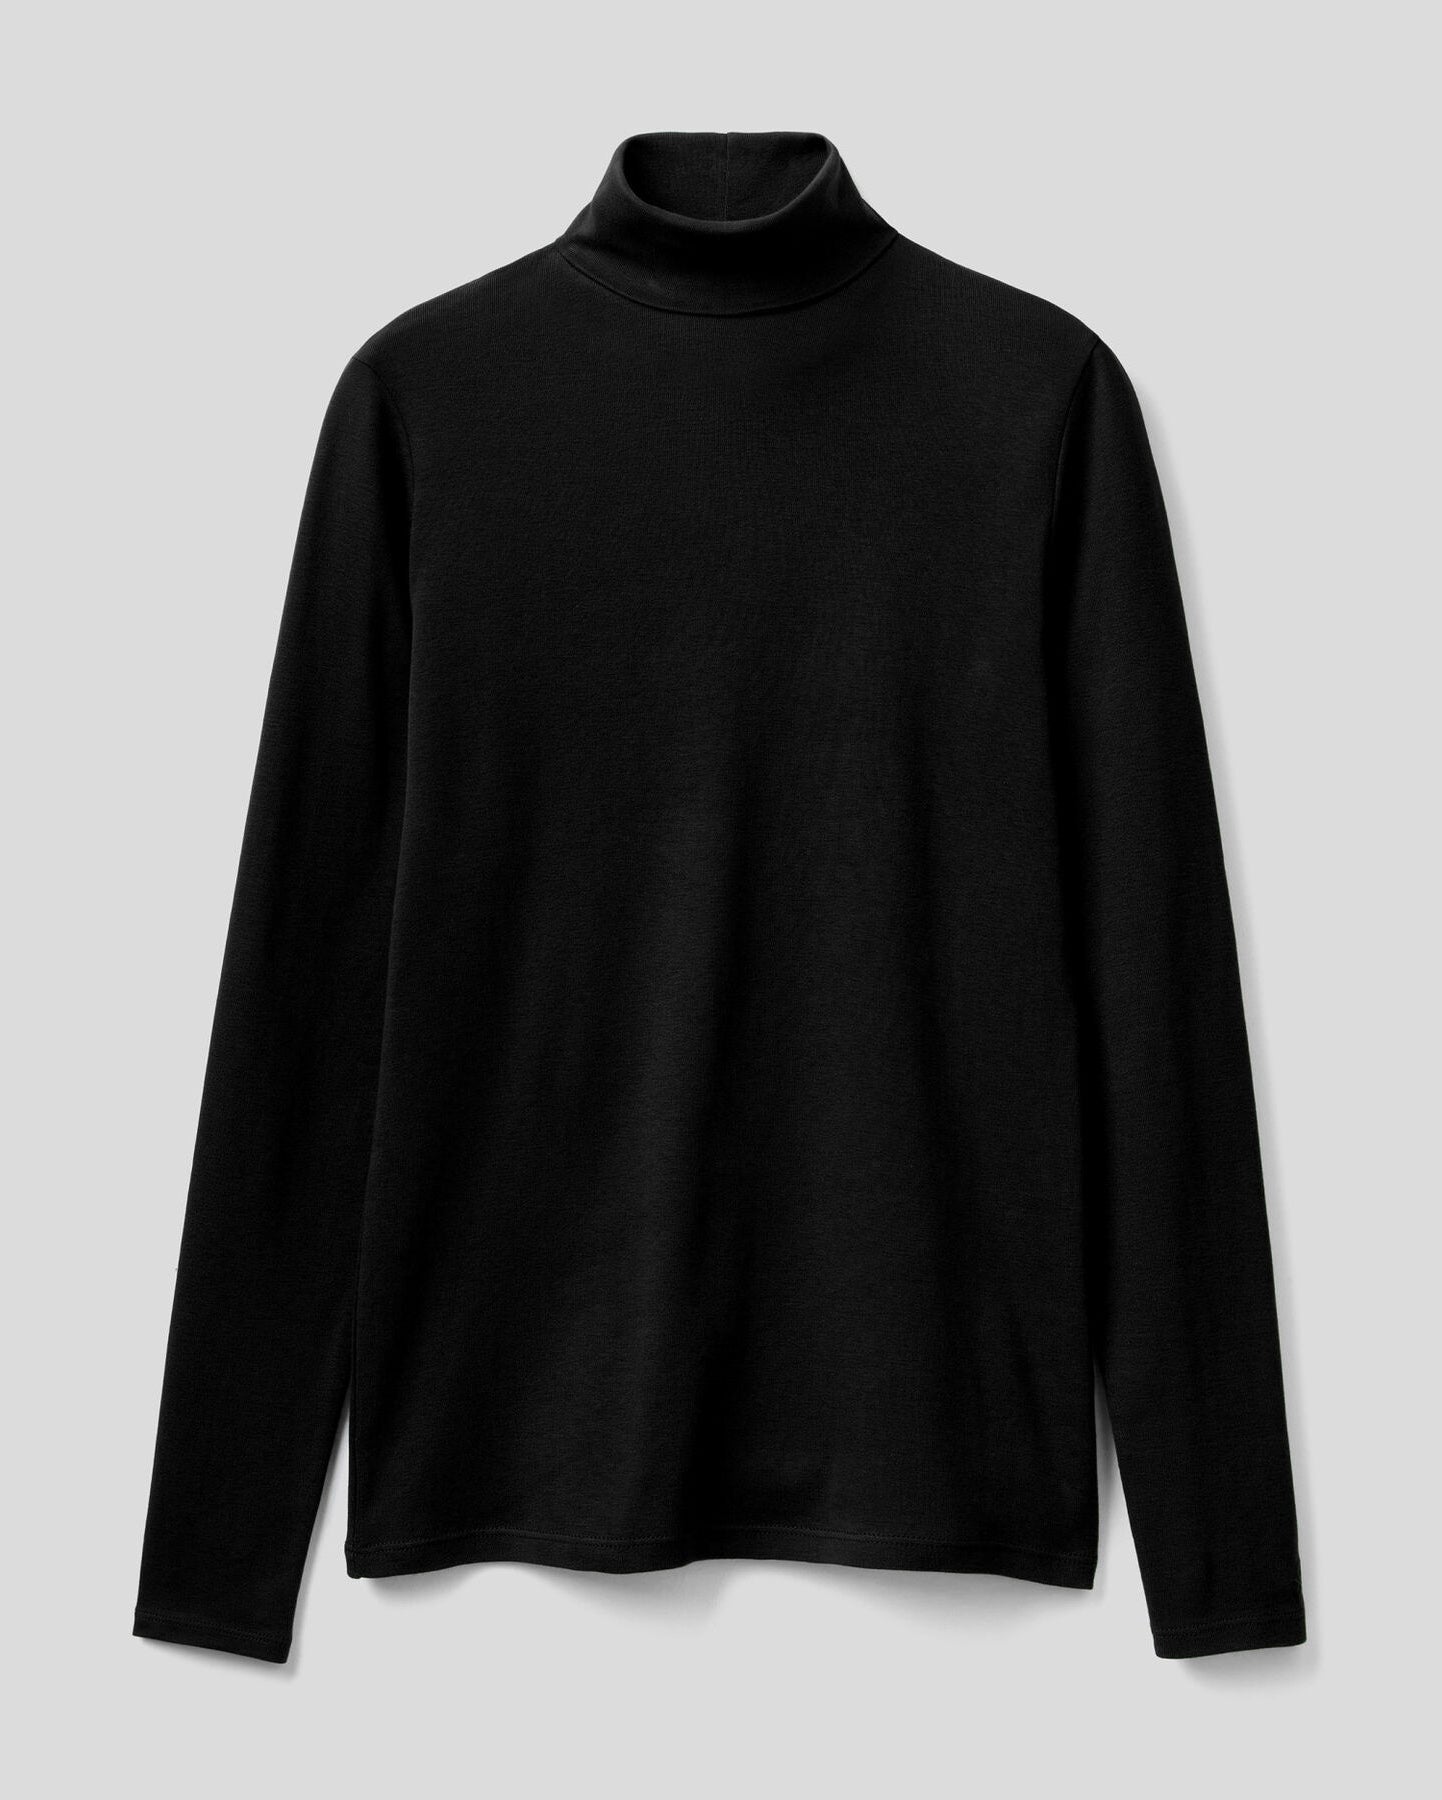 Black Long Sleeve T-Shirt With High Neck